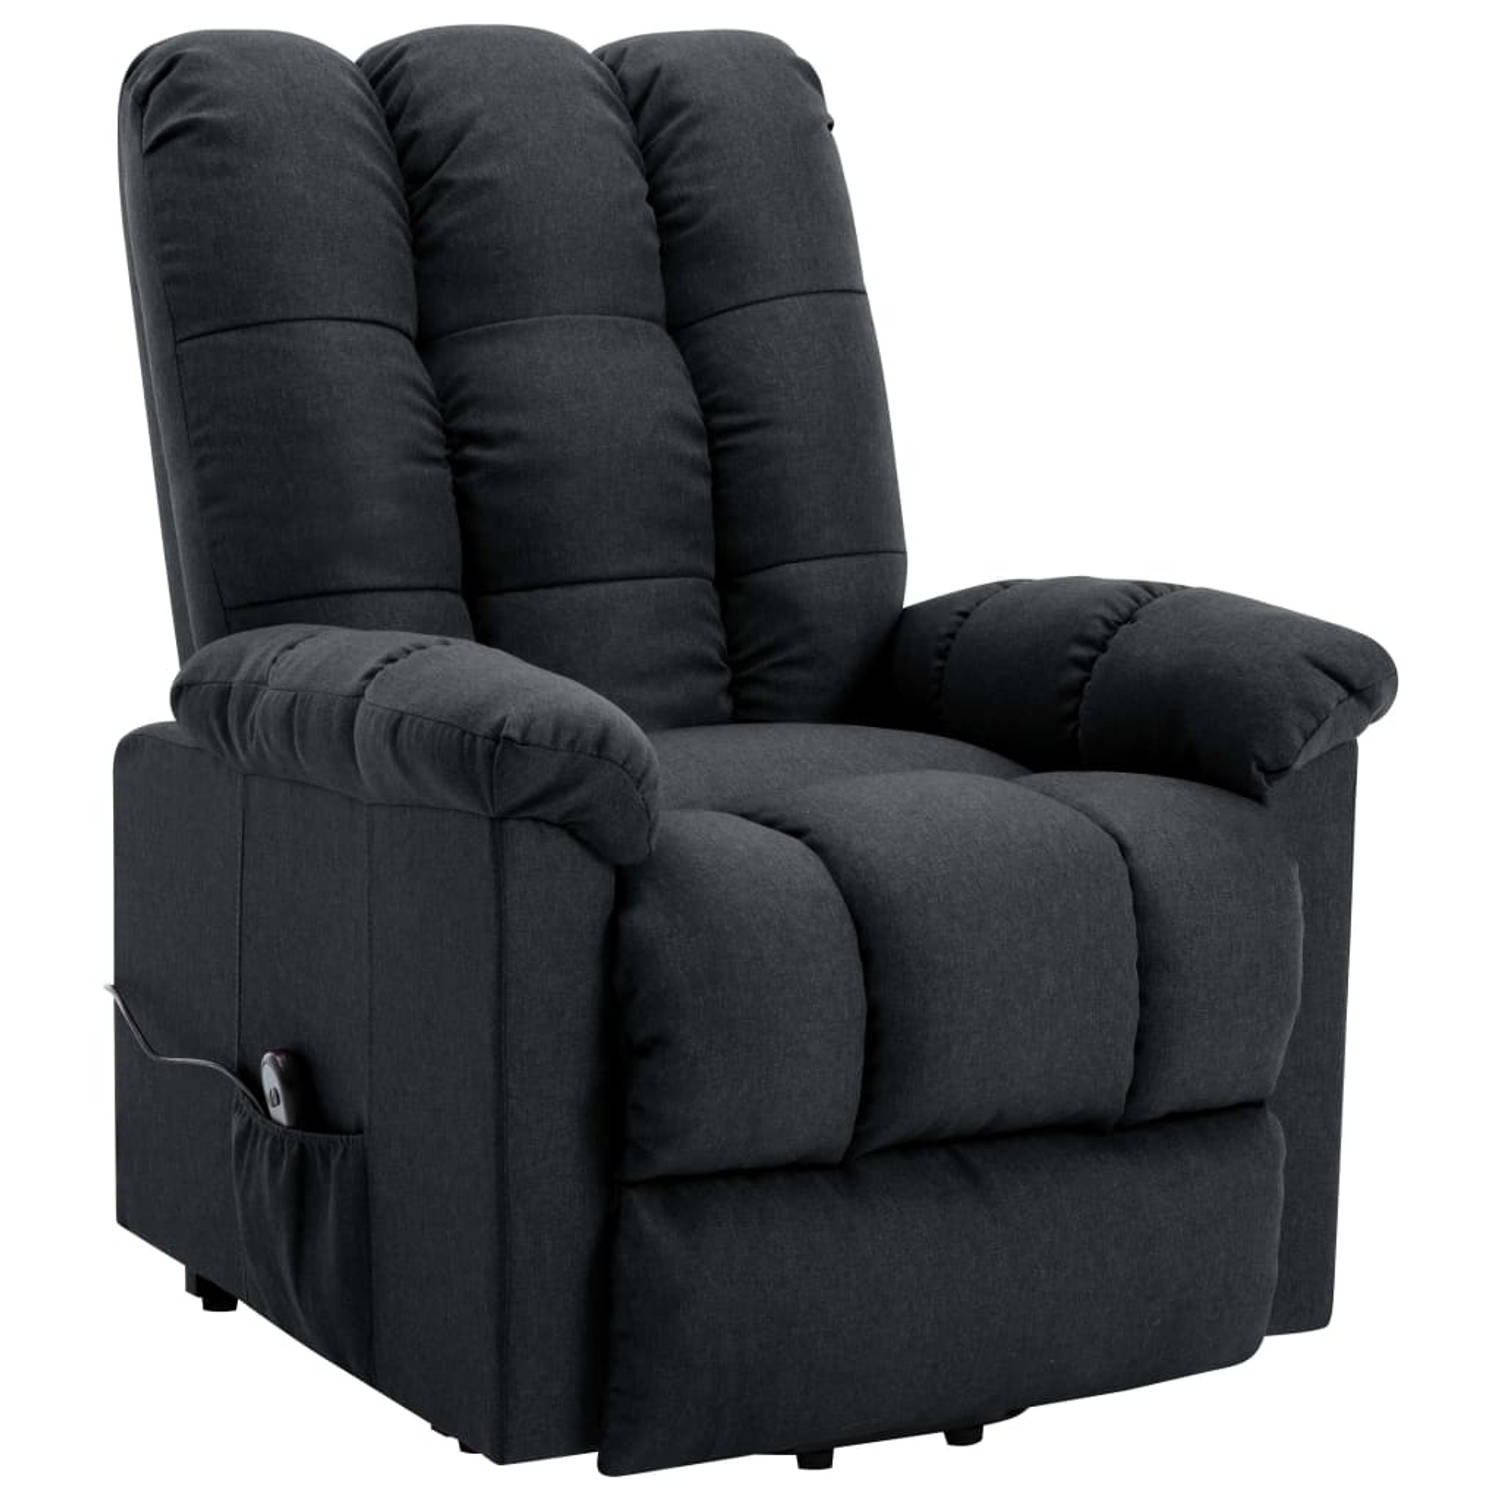 The Living Store Sta-op-stoel stof donkergrijs - Fauteuil